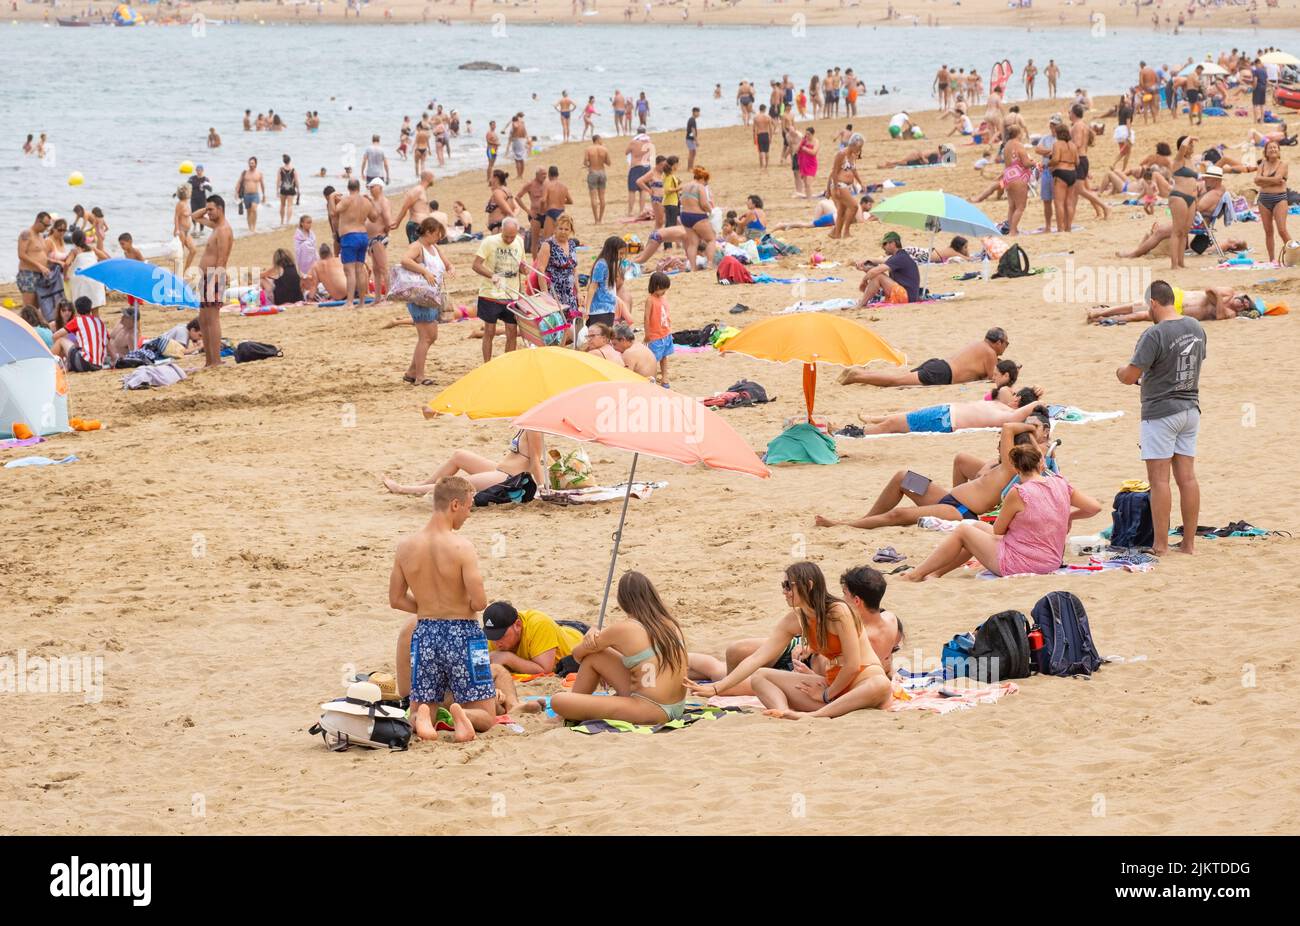 Las Palmas, Gran Canaria, Canary Islands, Spain. 3rd August, 2022. Tourists, many from the UK, bask on the city beach in Las Palmas on Gran Canaria; a popular summer holiday destination for many British holidaymakers. Credit: Alan Dawson/ Alamy Live News. Stock Photo